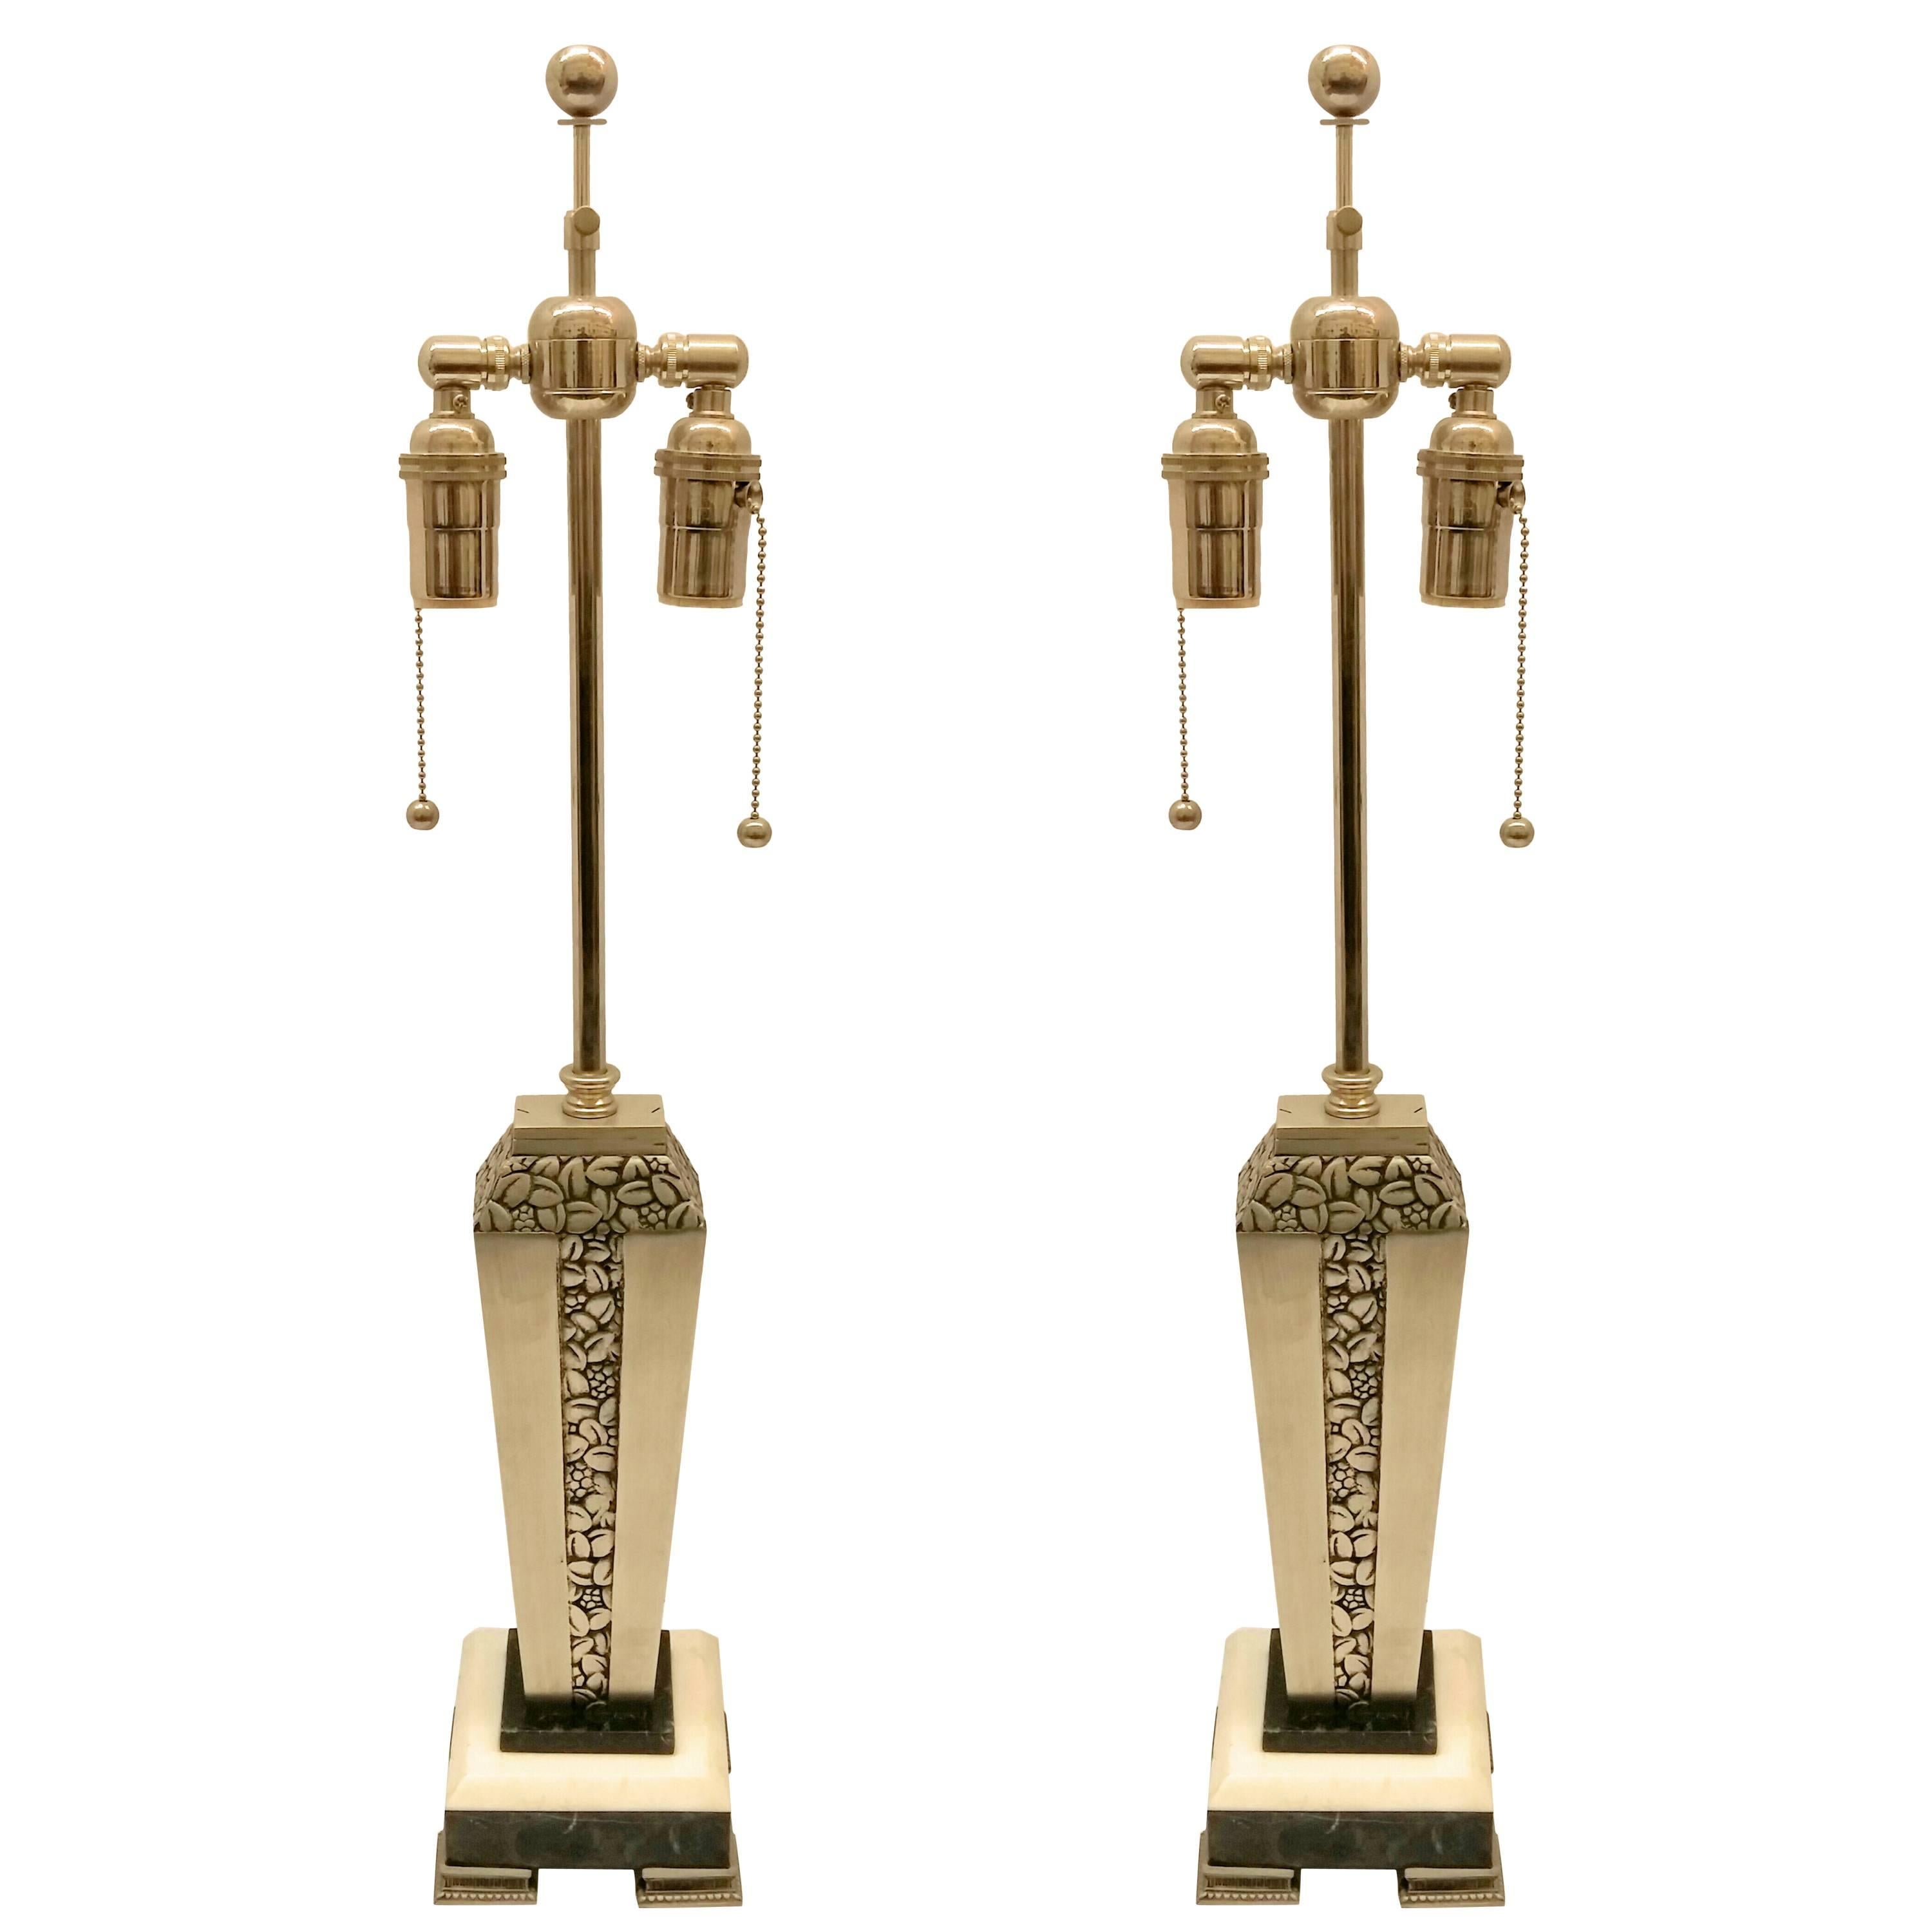 Pair of French Art Deco Table Lamps